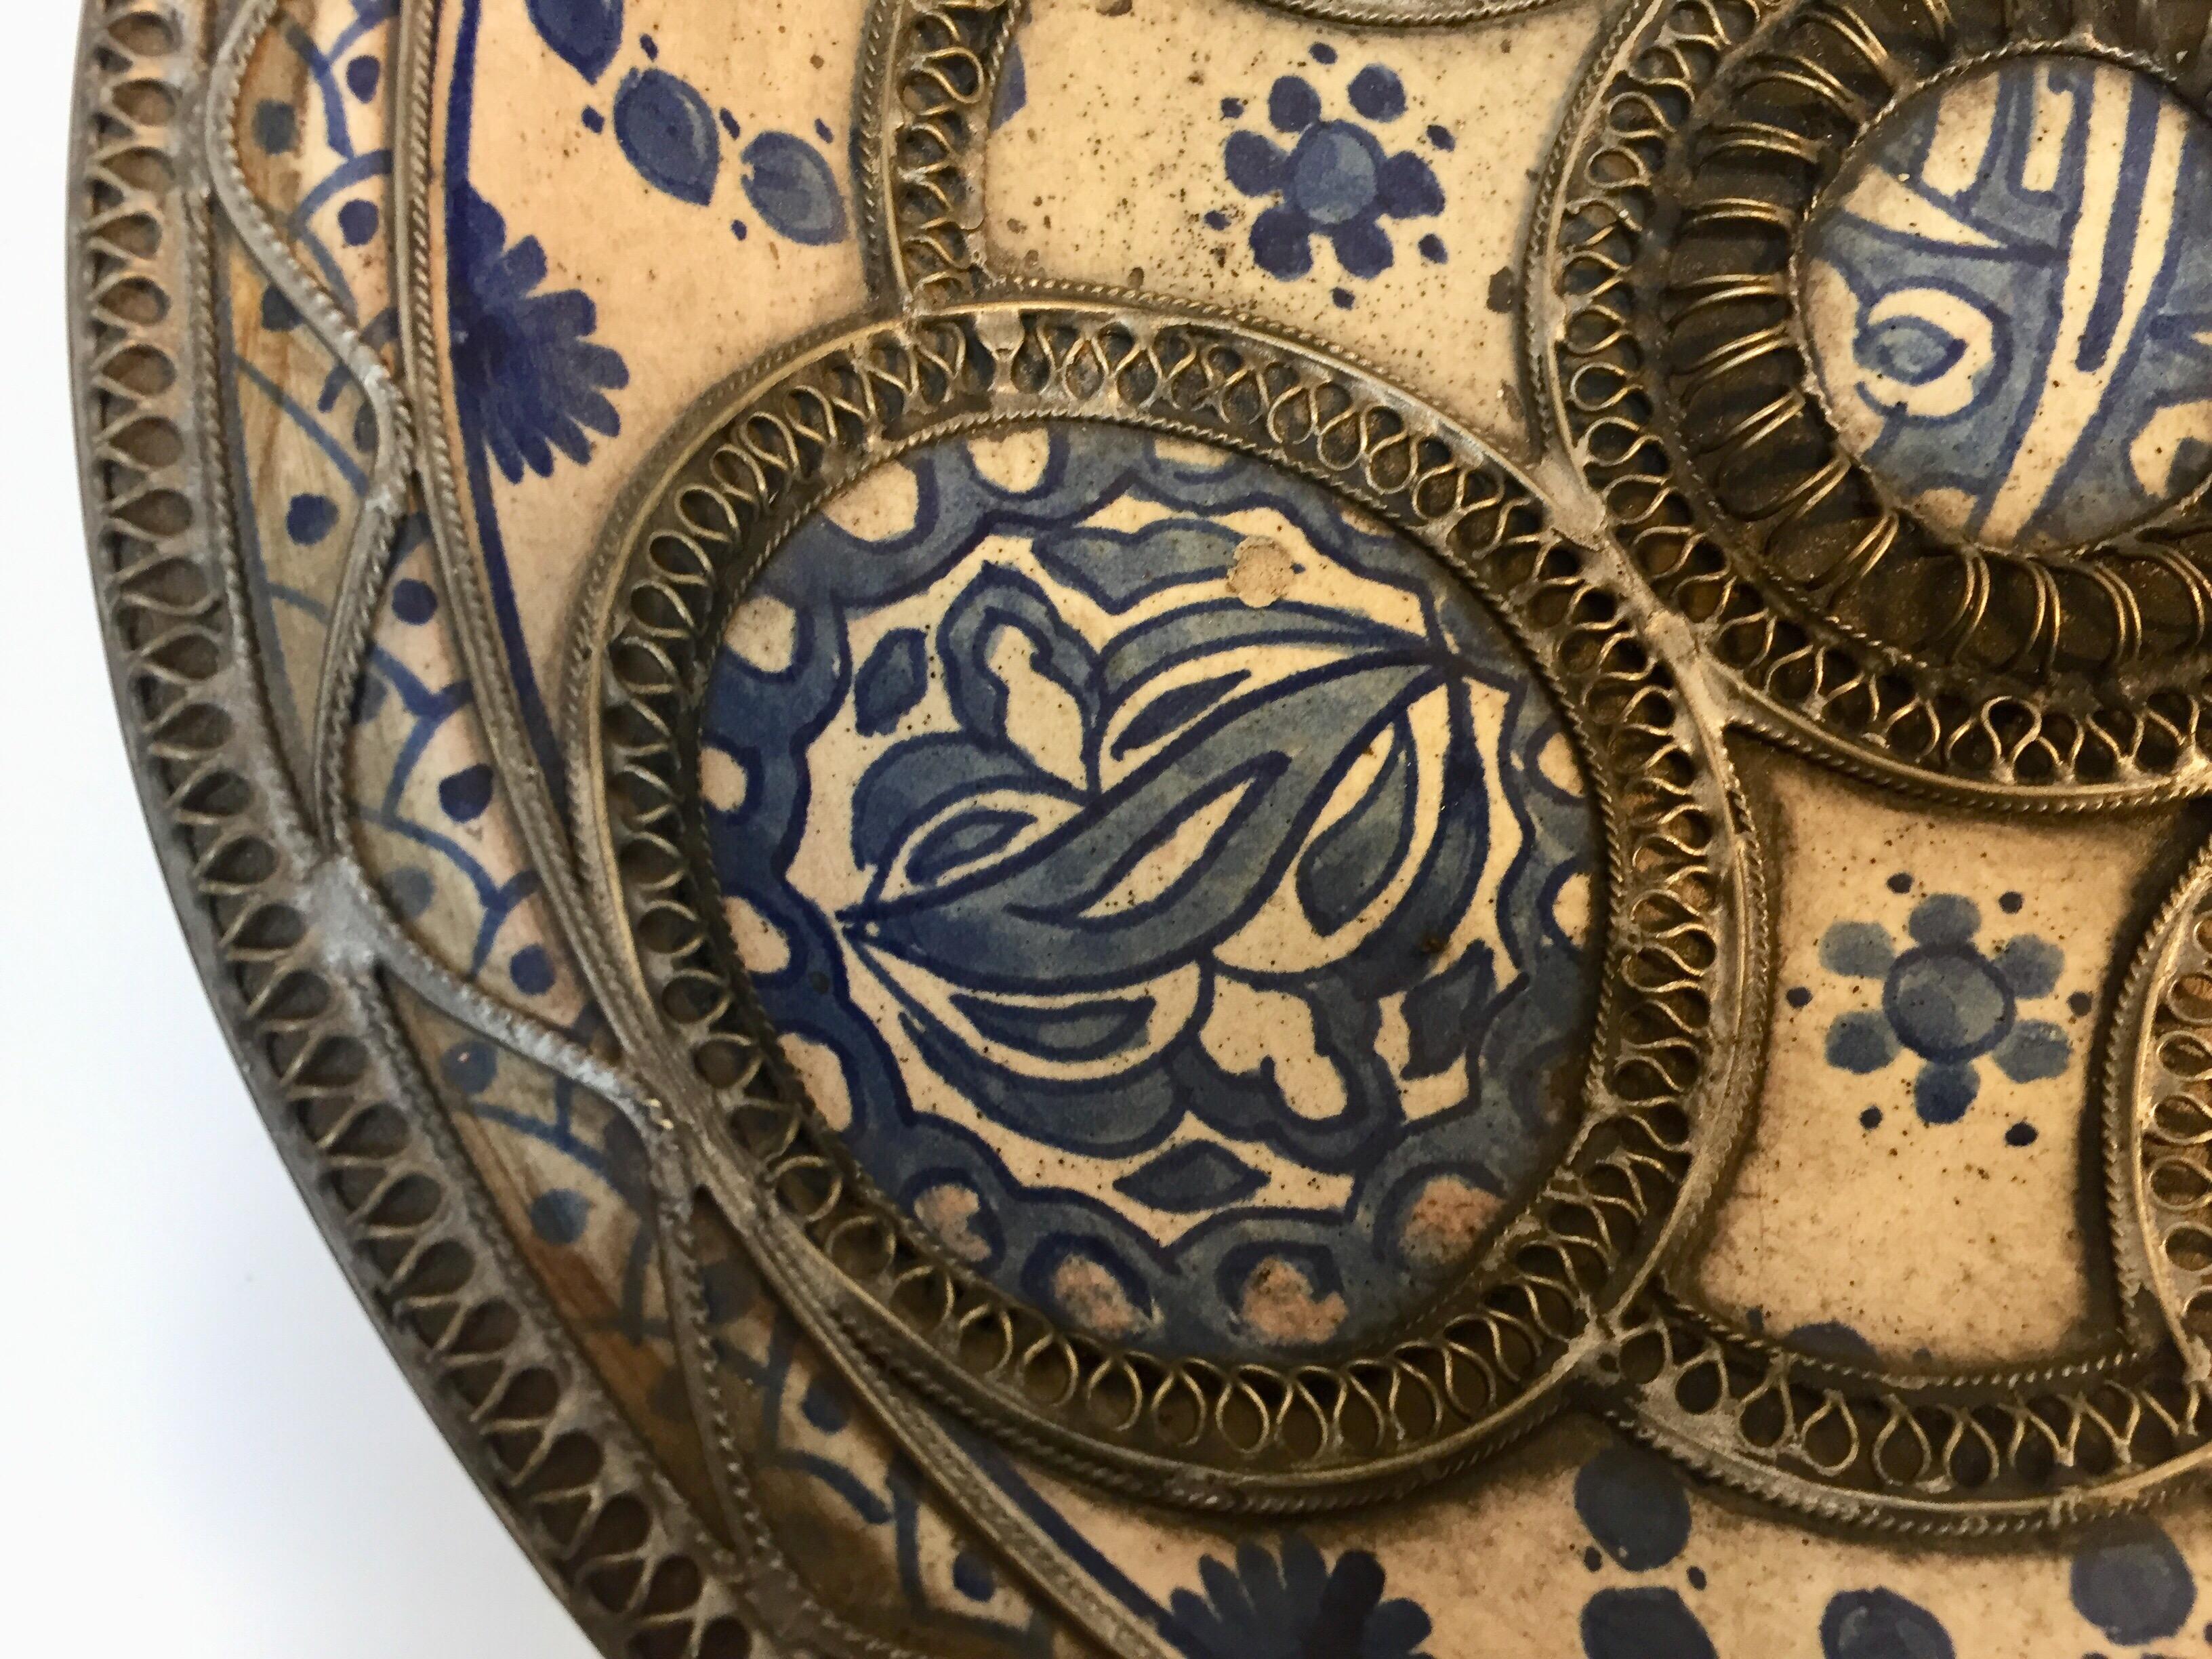 Decorative Moroccan Blue and White Handcrafted Ceramic Bowl from Fez 7